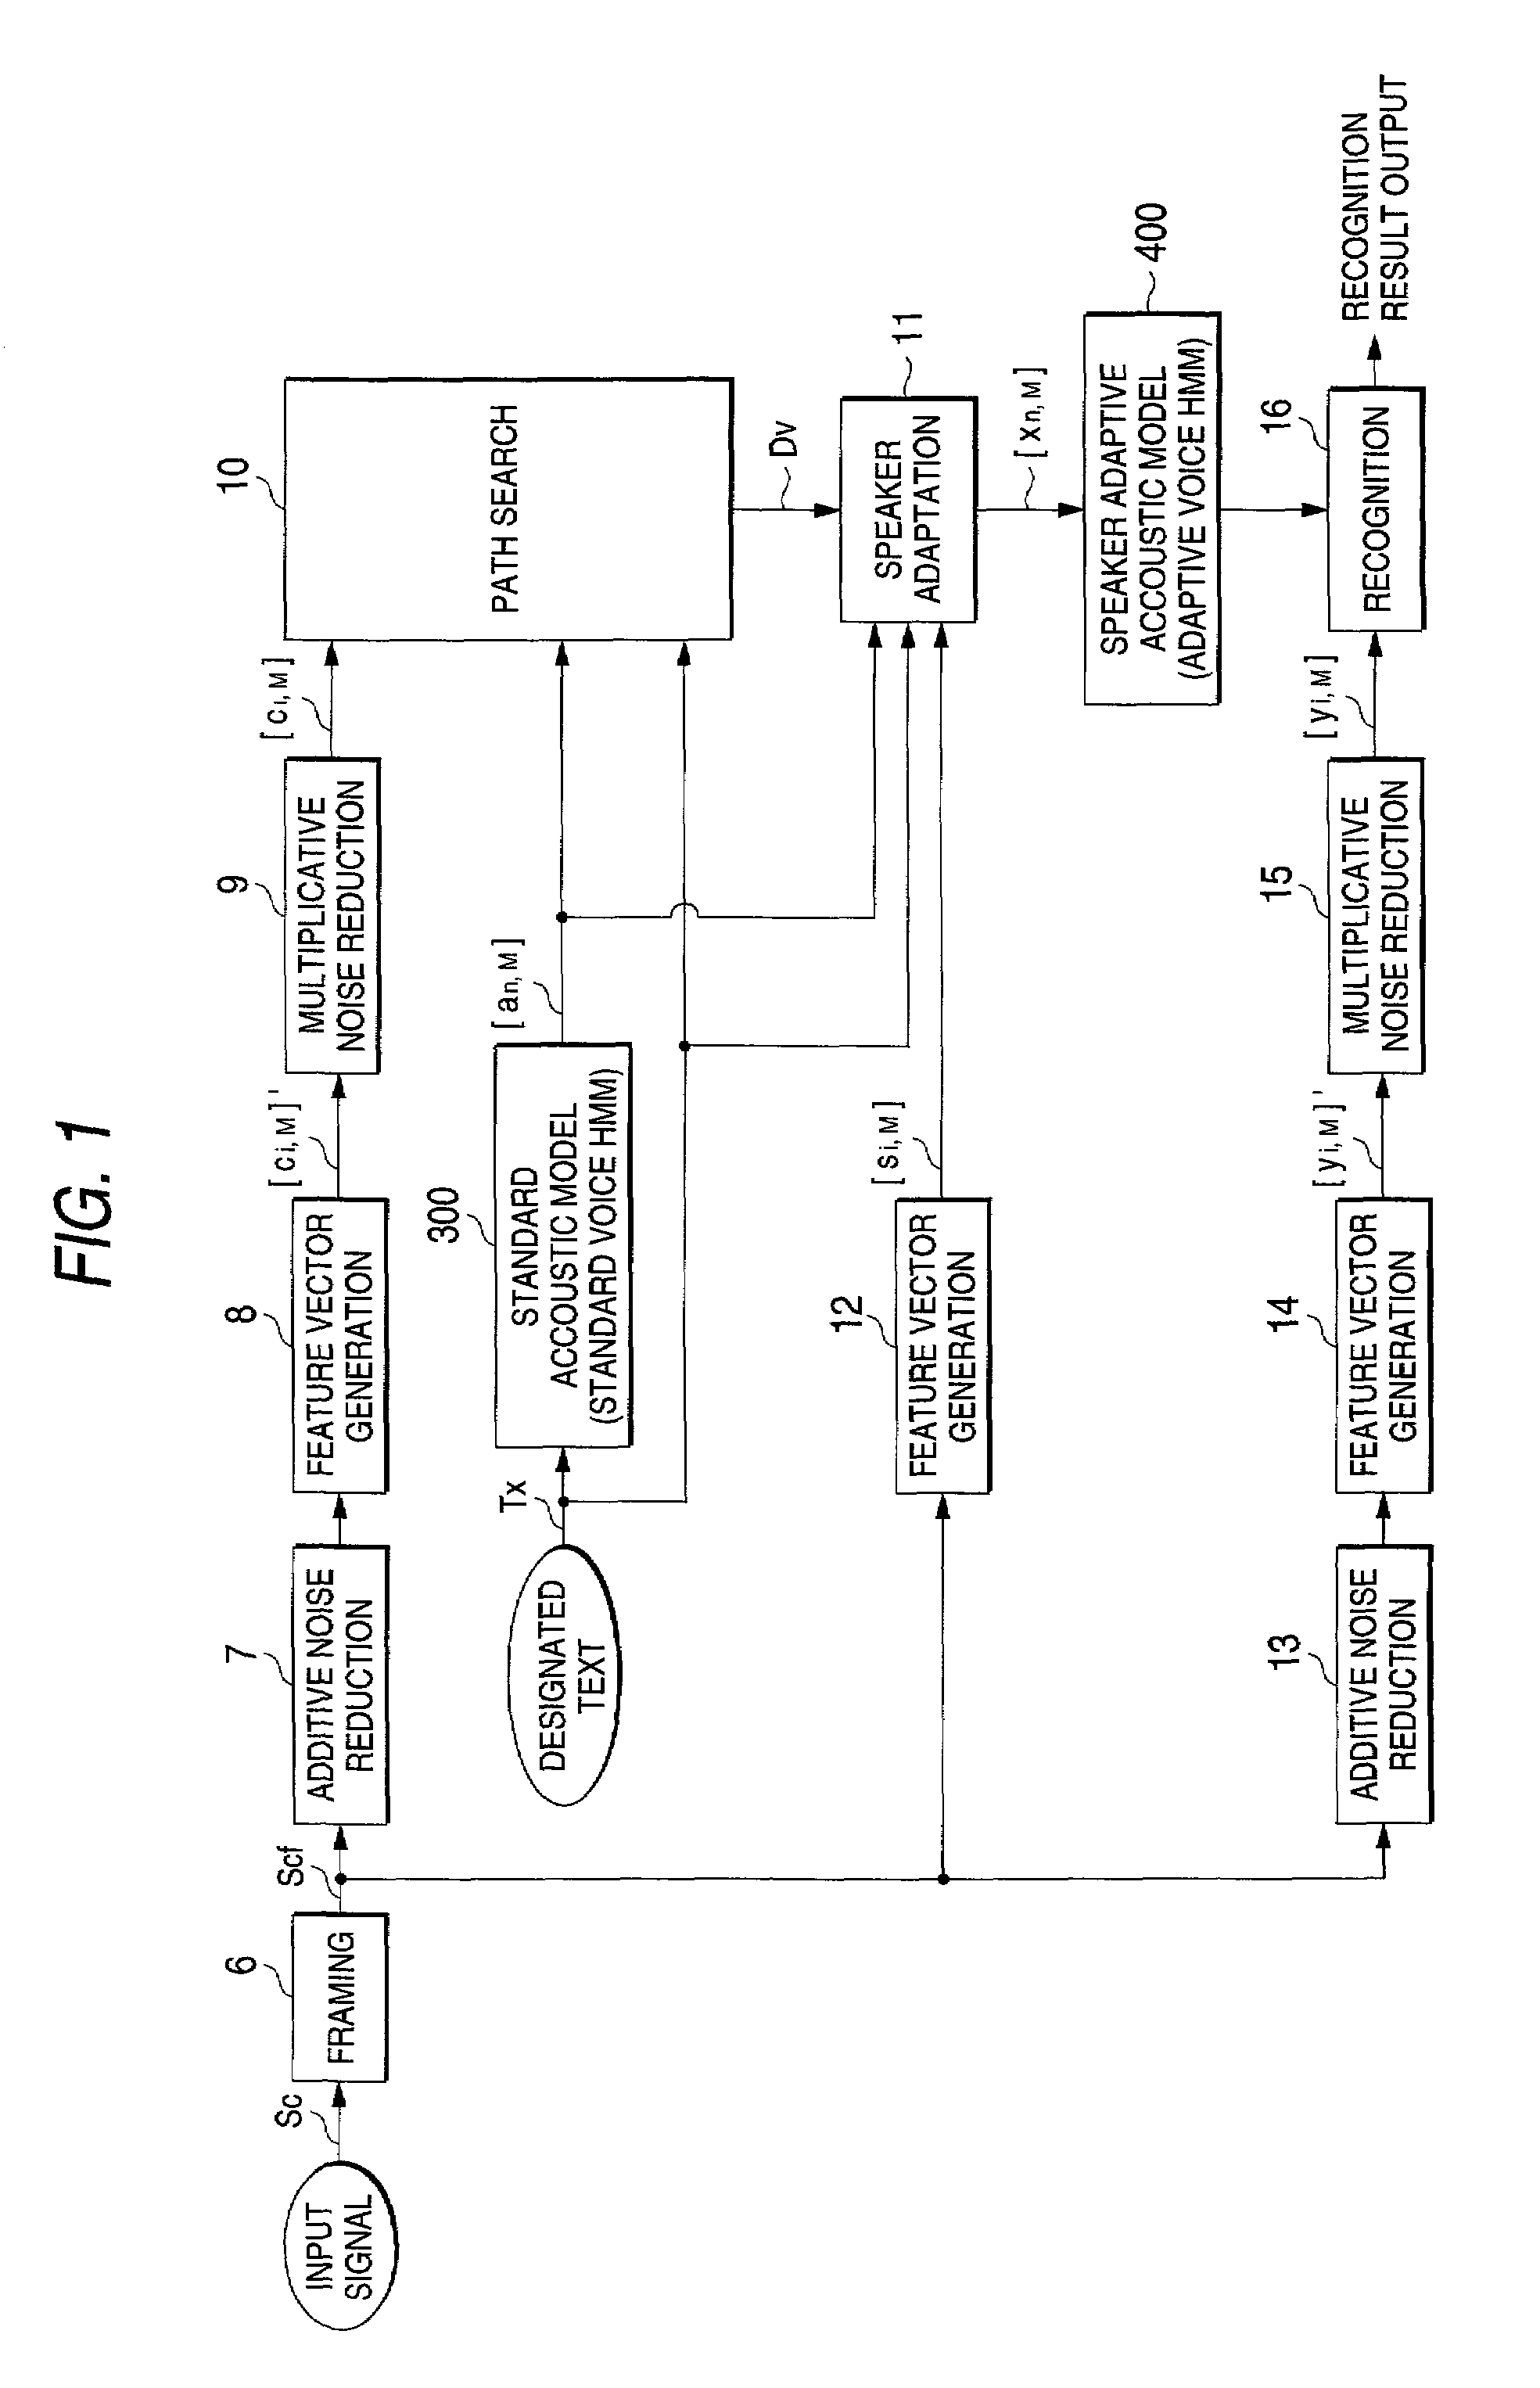 Speech recognition system with an adaptive acoustic model